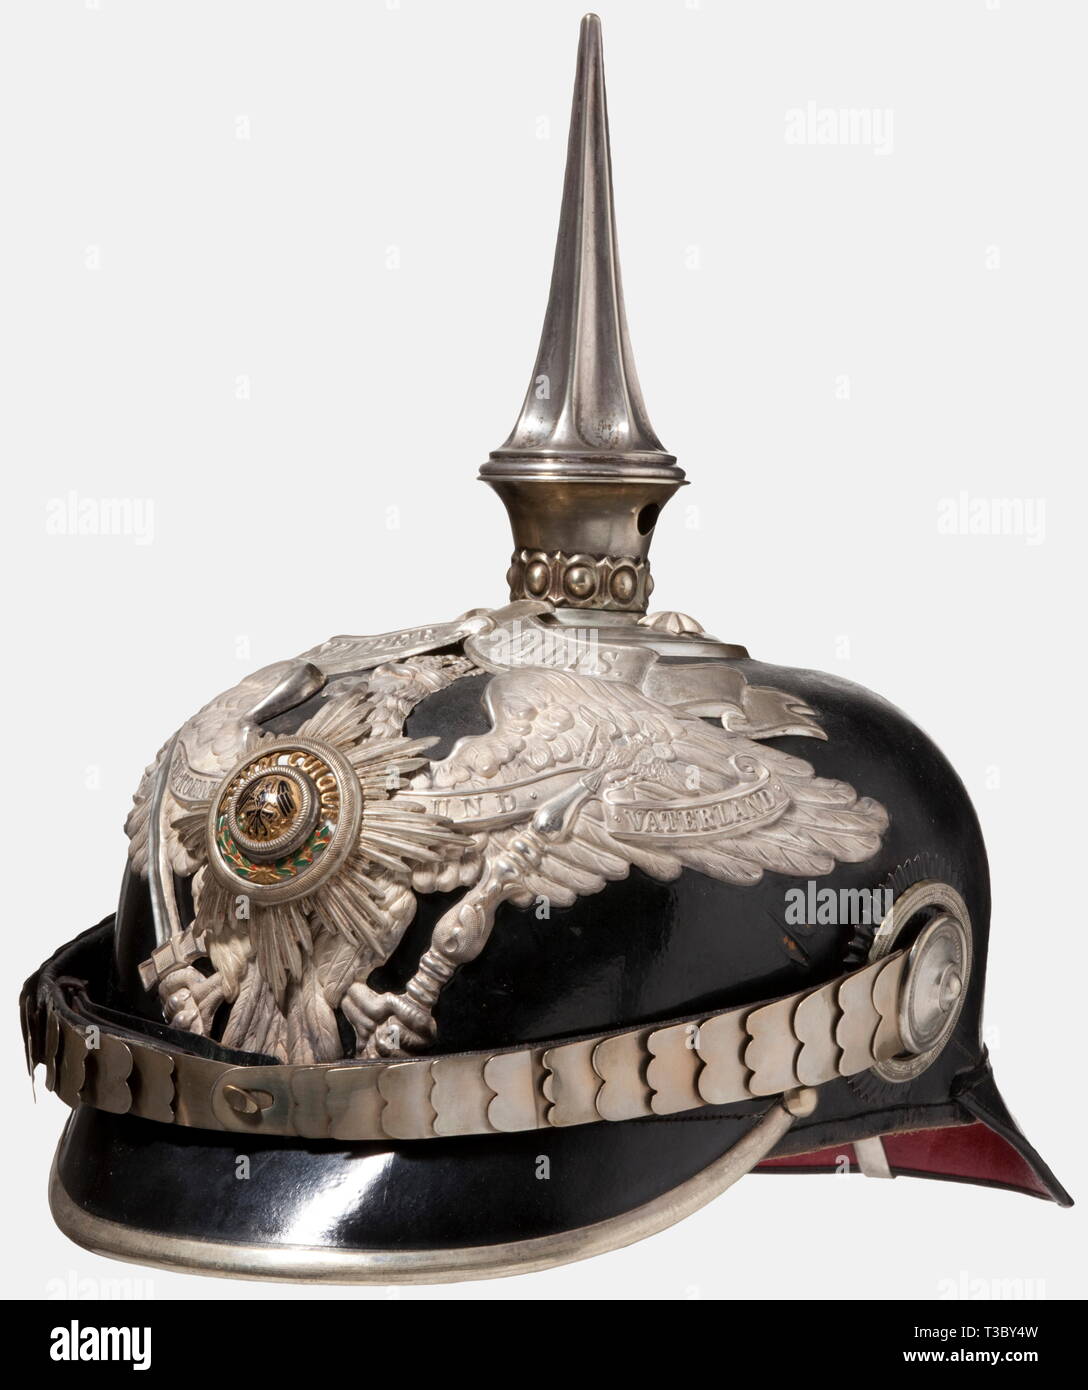 A helmet for officers of the 1st Foot Guards Regiment, Potsdam, circa 1910 A tall officer's helmet in the rare version with the 'SEMPER TALIS' scroll awarded to the 1st Battalion and the regimental staff on 27 January 1889. Black lacquered leather body. Partially frosted and polished silver-plated mountings. Circular crown plate with a fluted spike. Guards eagle with a strongly cambered, enamelled guard star. Silver-plated flat metal chinscales on silver-plated rosettes. Both cockades. Light-coloured sweatband and ribbed silk lining (loose in bac, Additional-Rights-Clearance-Info-Not-Available Stock Photo